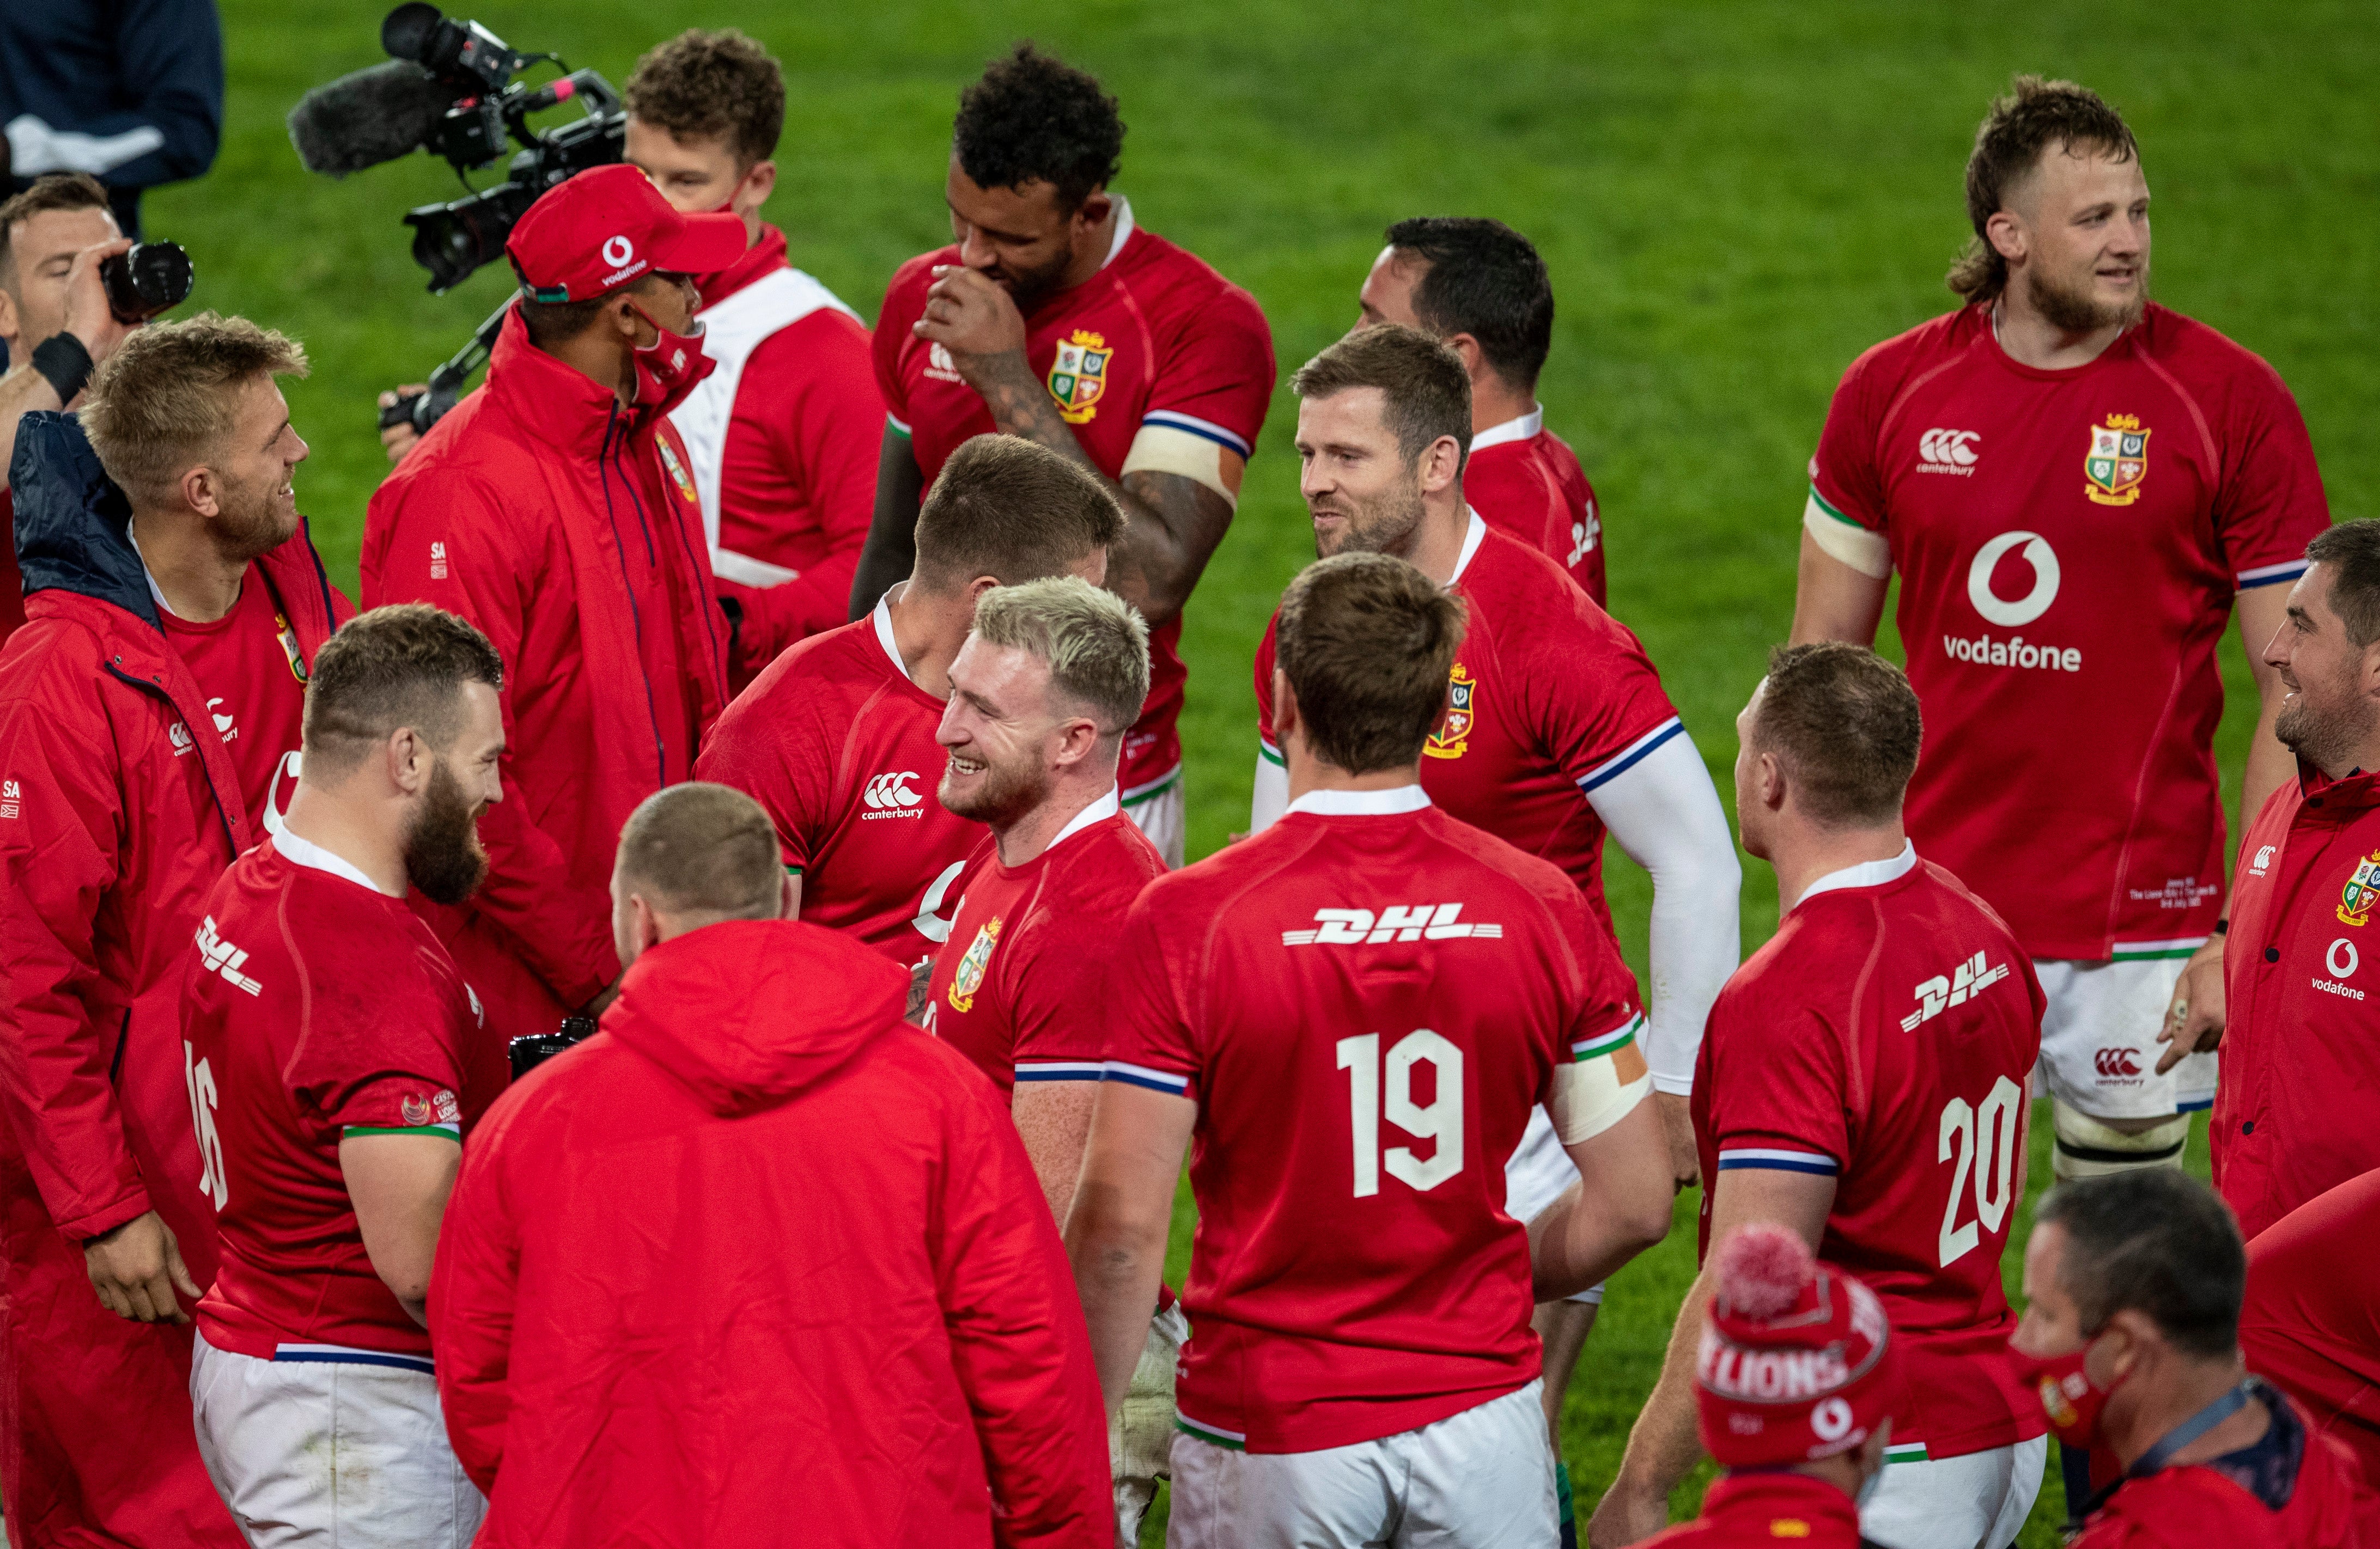 The British and Irish Lions are in South Africa